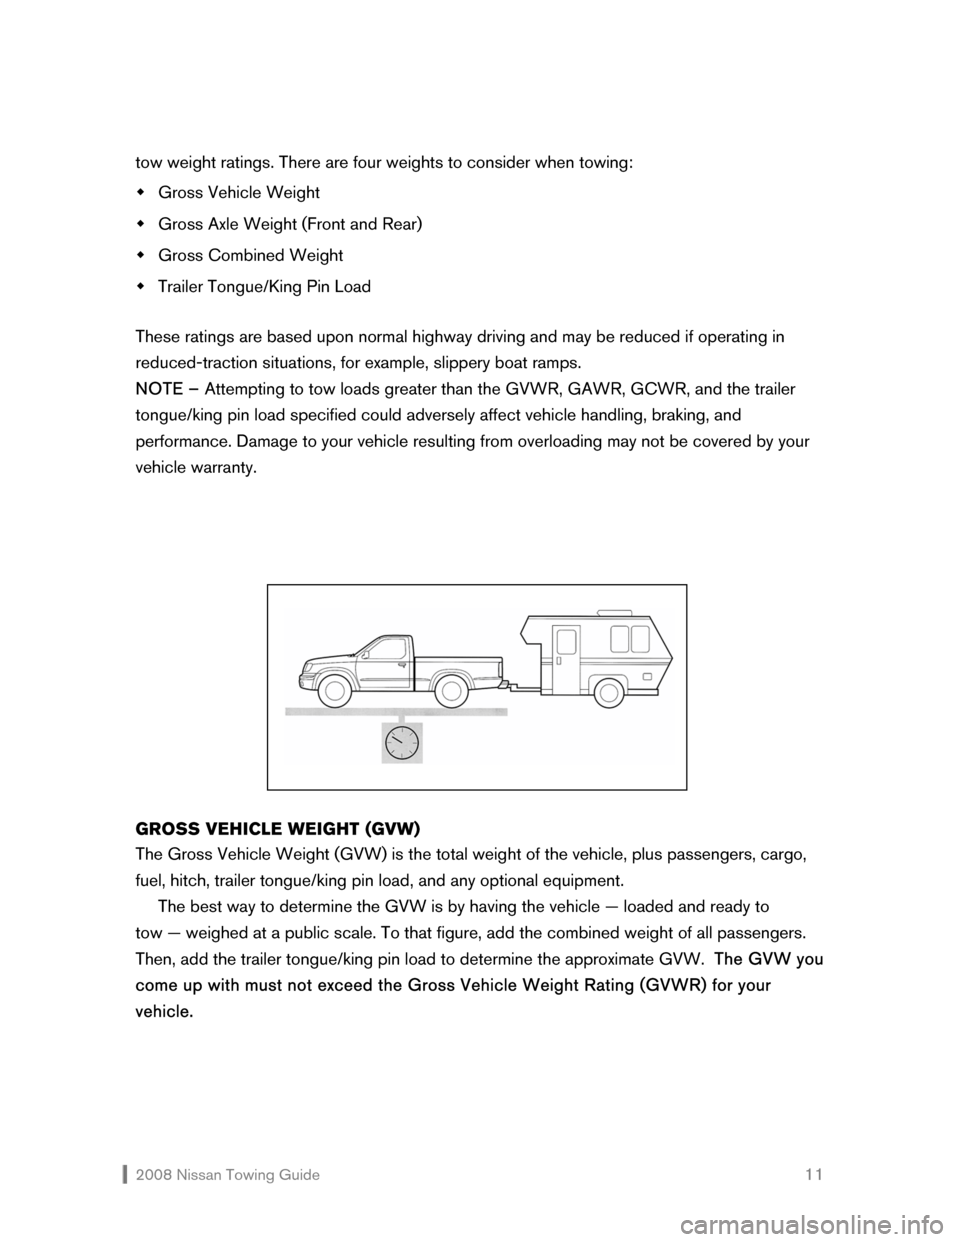 NISSAN 350Z 2008 Z33 Towing Guide  2008 Nissan Towing Guide    11 tow weight ratings. There are four weights to consider when towing:  
�Š Gross Vehicle Weight 
�Š Gross Axle Weight (Front and Rear) 
�Š Gross Combined Weight 
�Š T